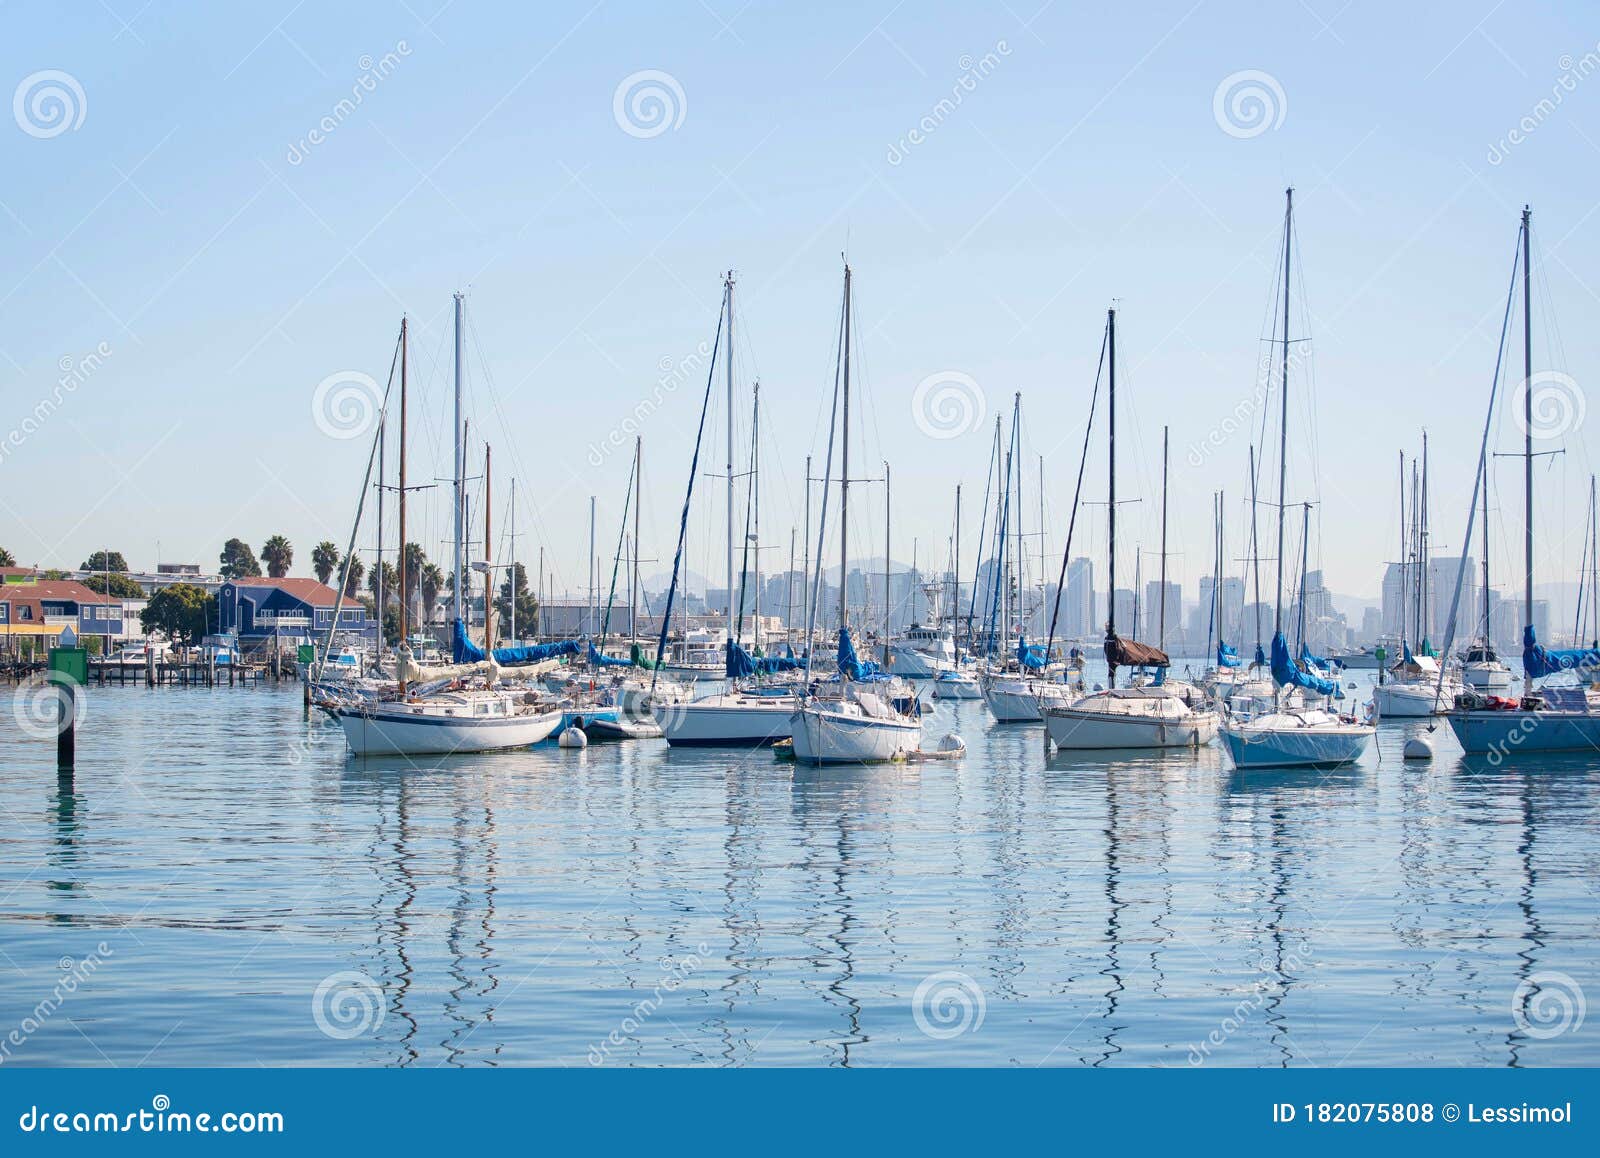 San Diego Waterfront with Sailing Boats Stock Photo - Image of pacific ...